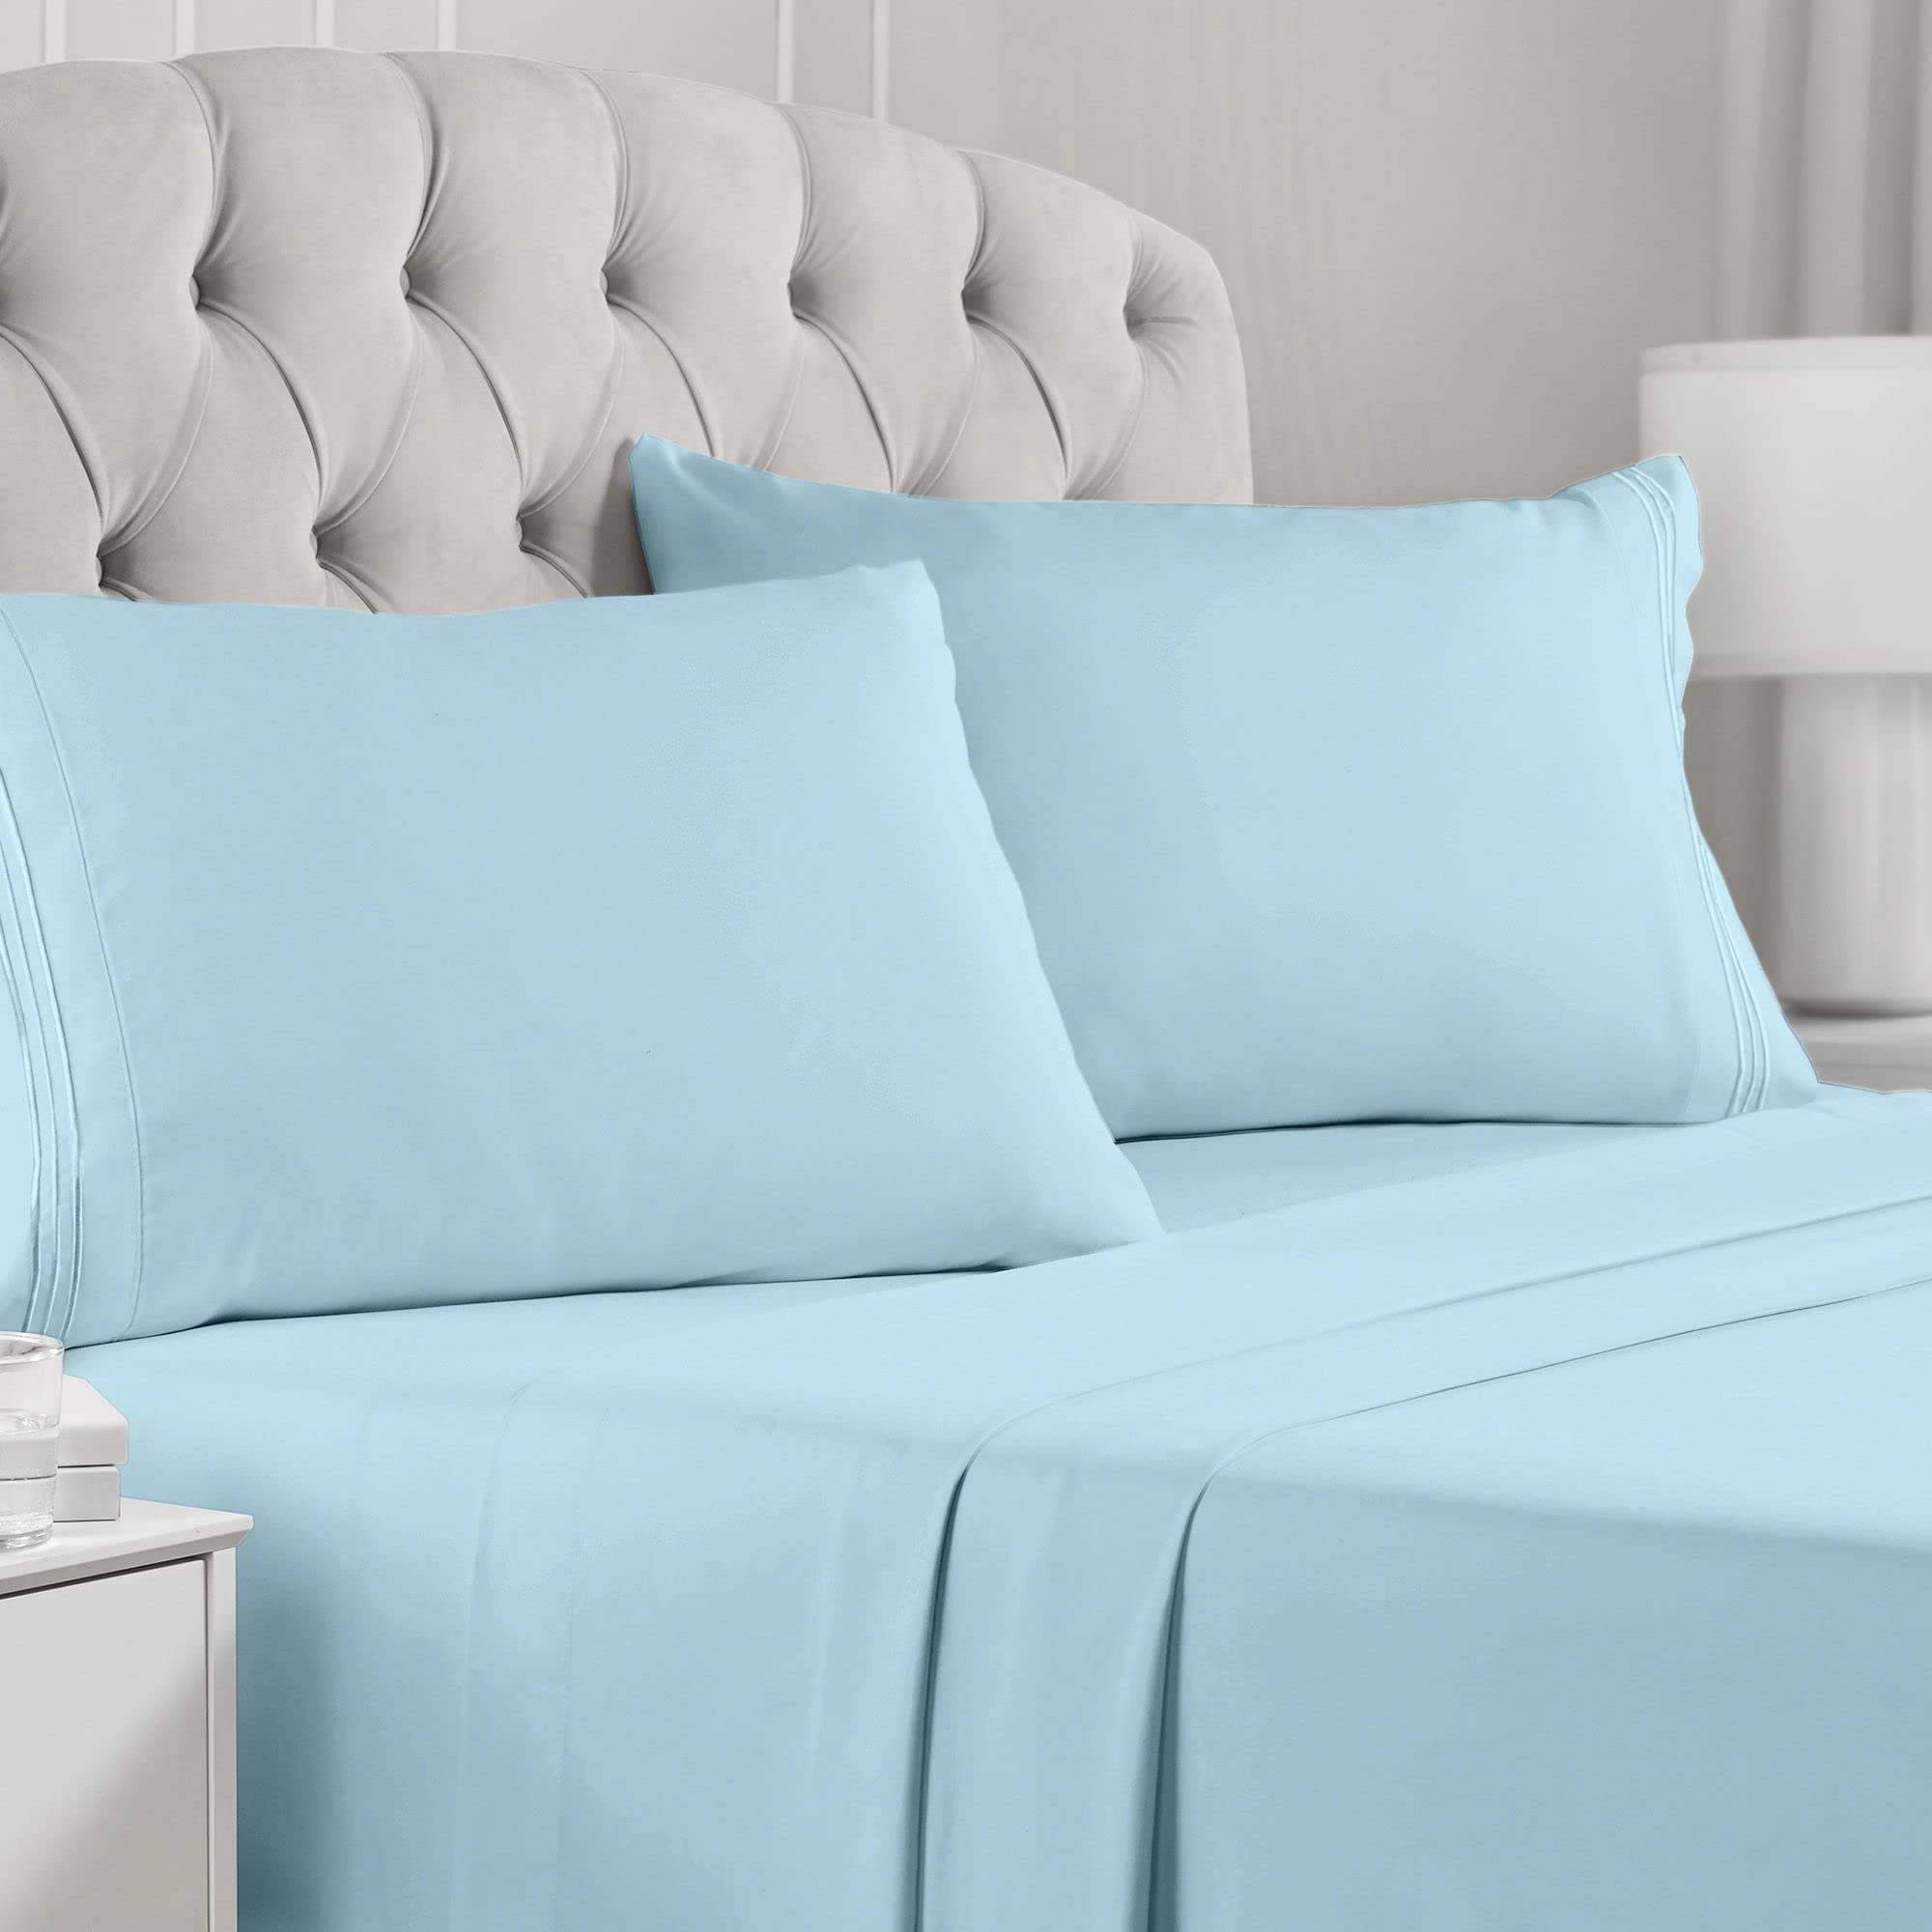 Book Cover Mellanni California King Sheet Set - 4 Piece Iconic Collection Bedding Sheets & Pillowcases - Hotel Luxury, Extra Soft, Cooling Bed Sheets - Deep Pocket up to 16 inch - Easy care (Cal King, Baby Blue) California King Baby Blue